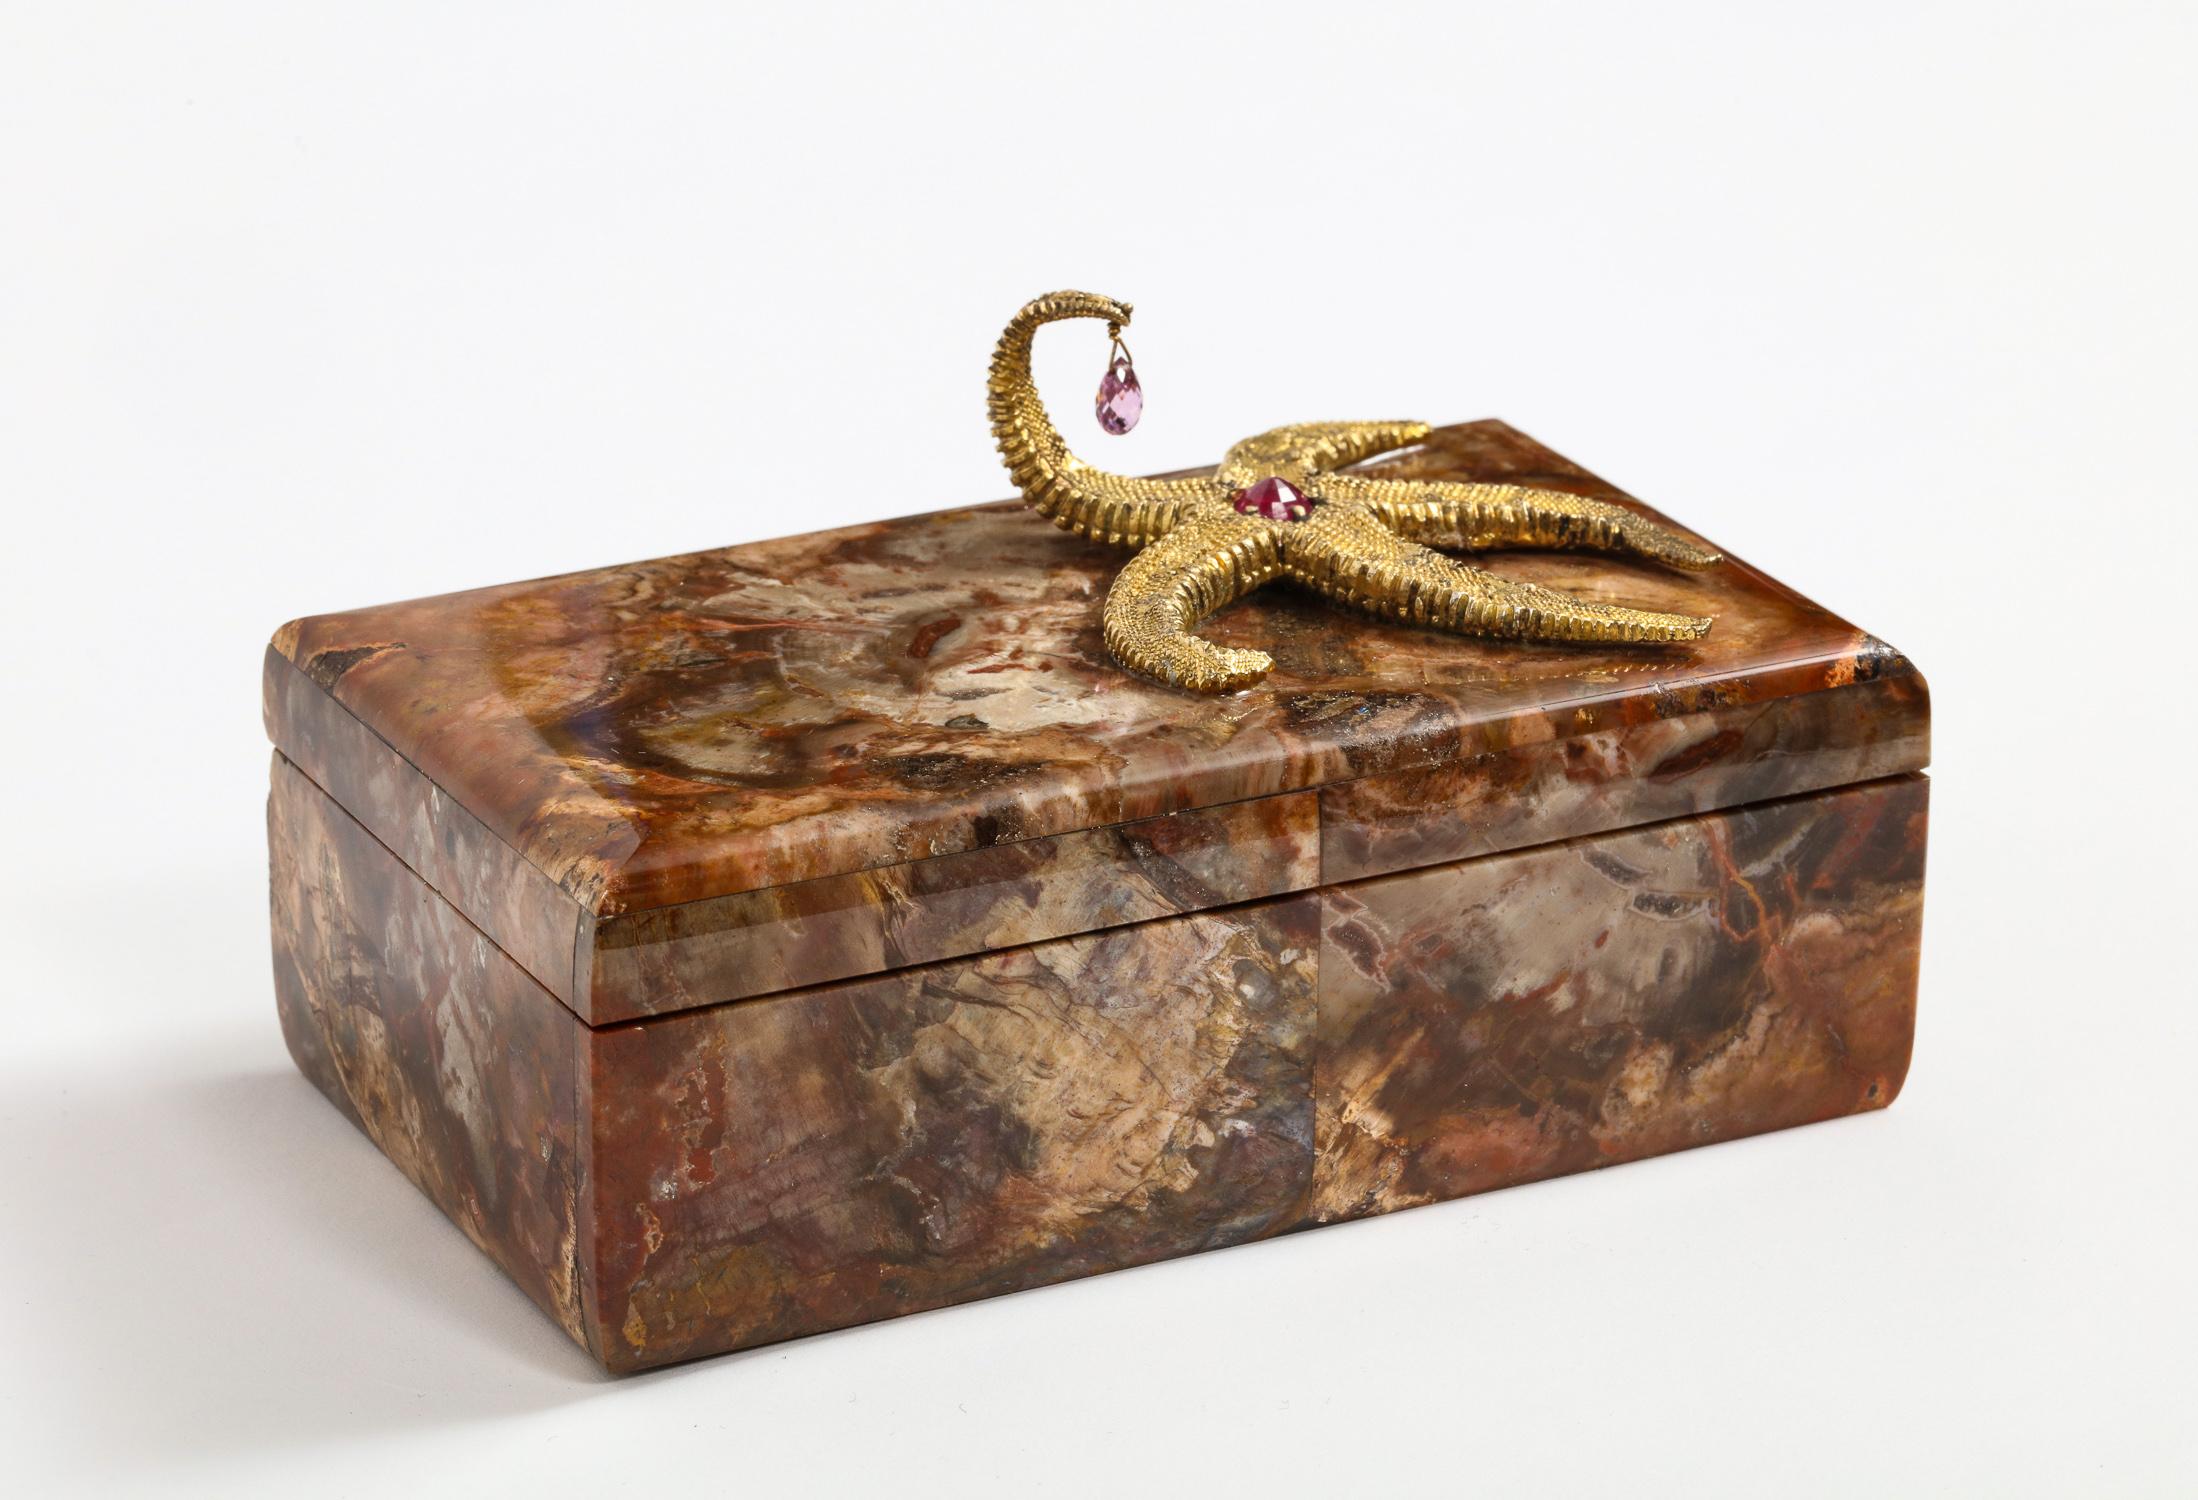 A petrified wood box with silver-gilt starfish and pink sapphire by Nardi,
Venice, Italy, 20th century.

Comprised of finely polished petrified wood chosen for their exceptional color and patterns, the lid mounted with a large silver gilt